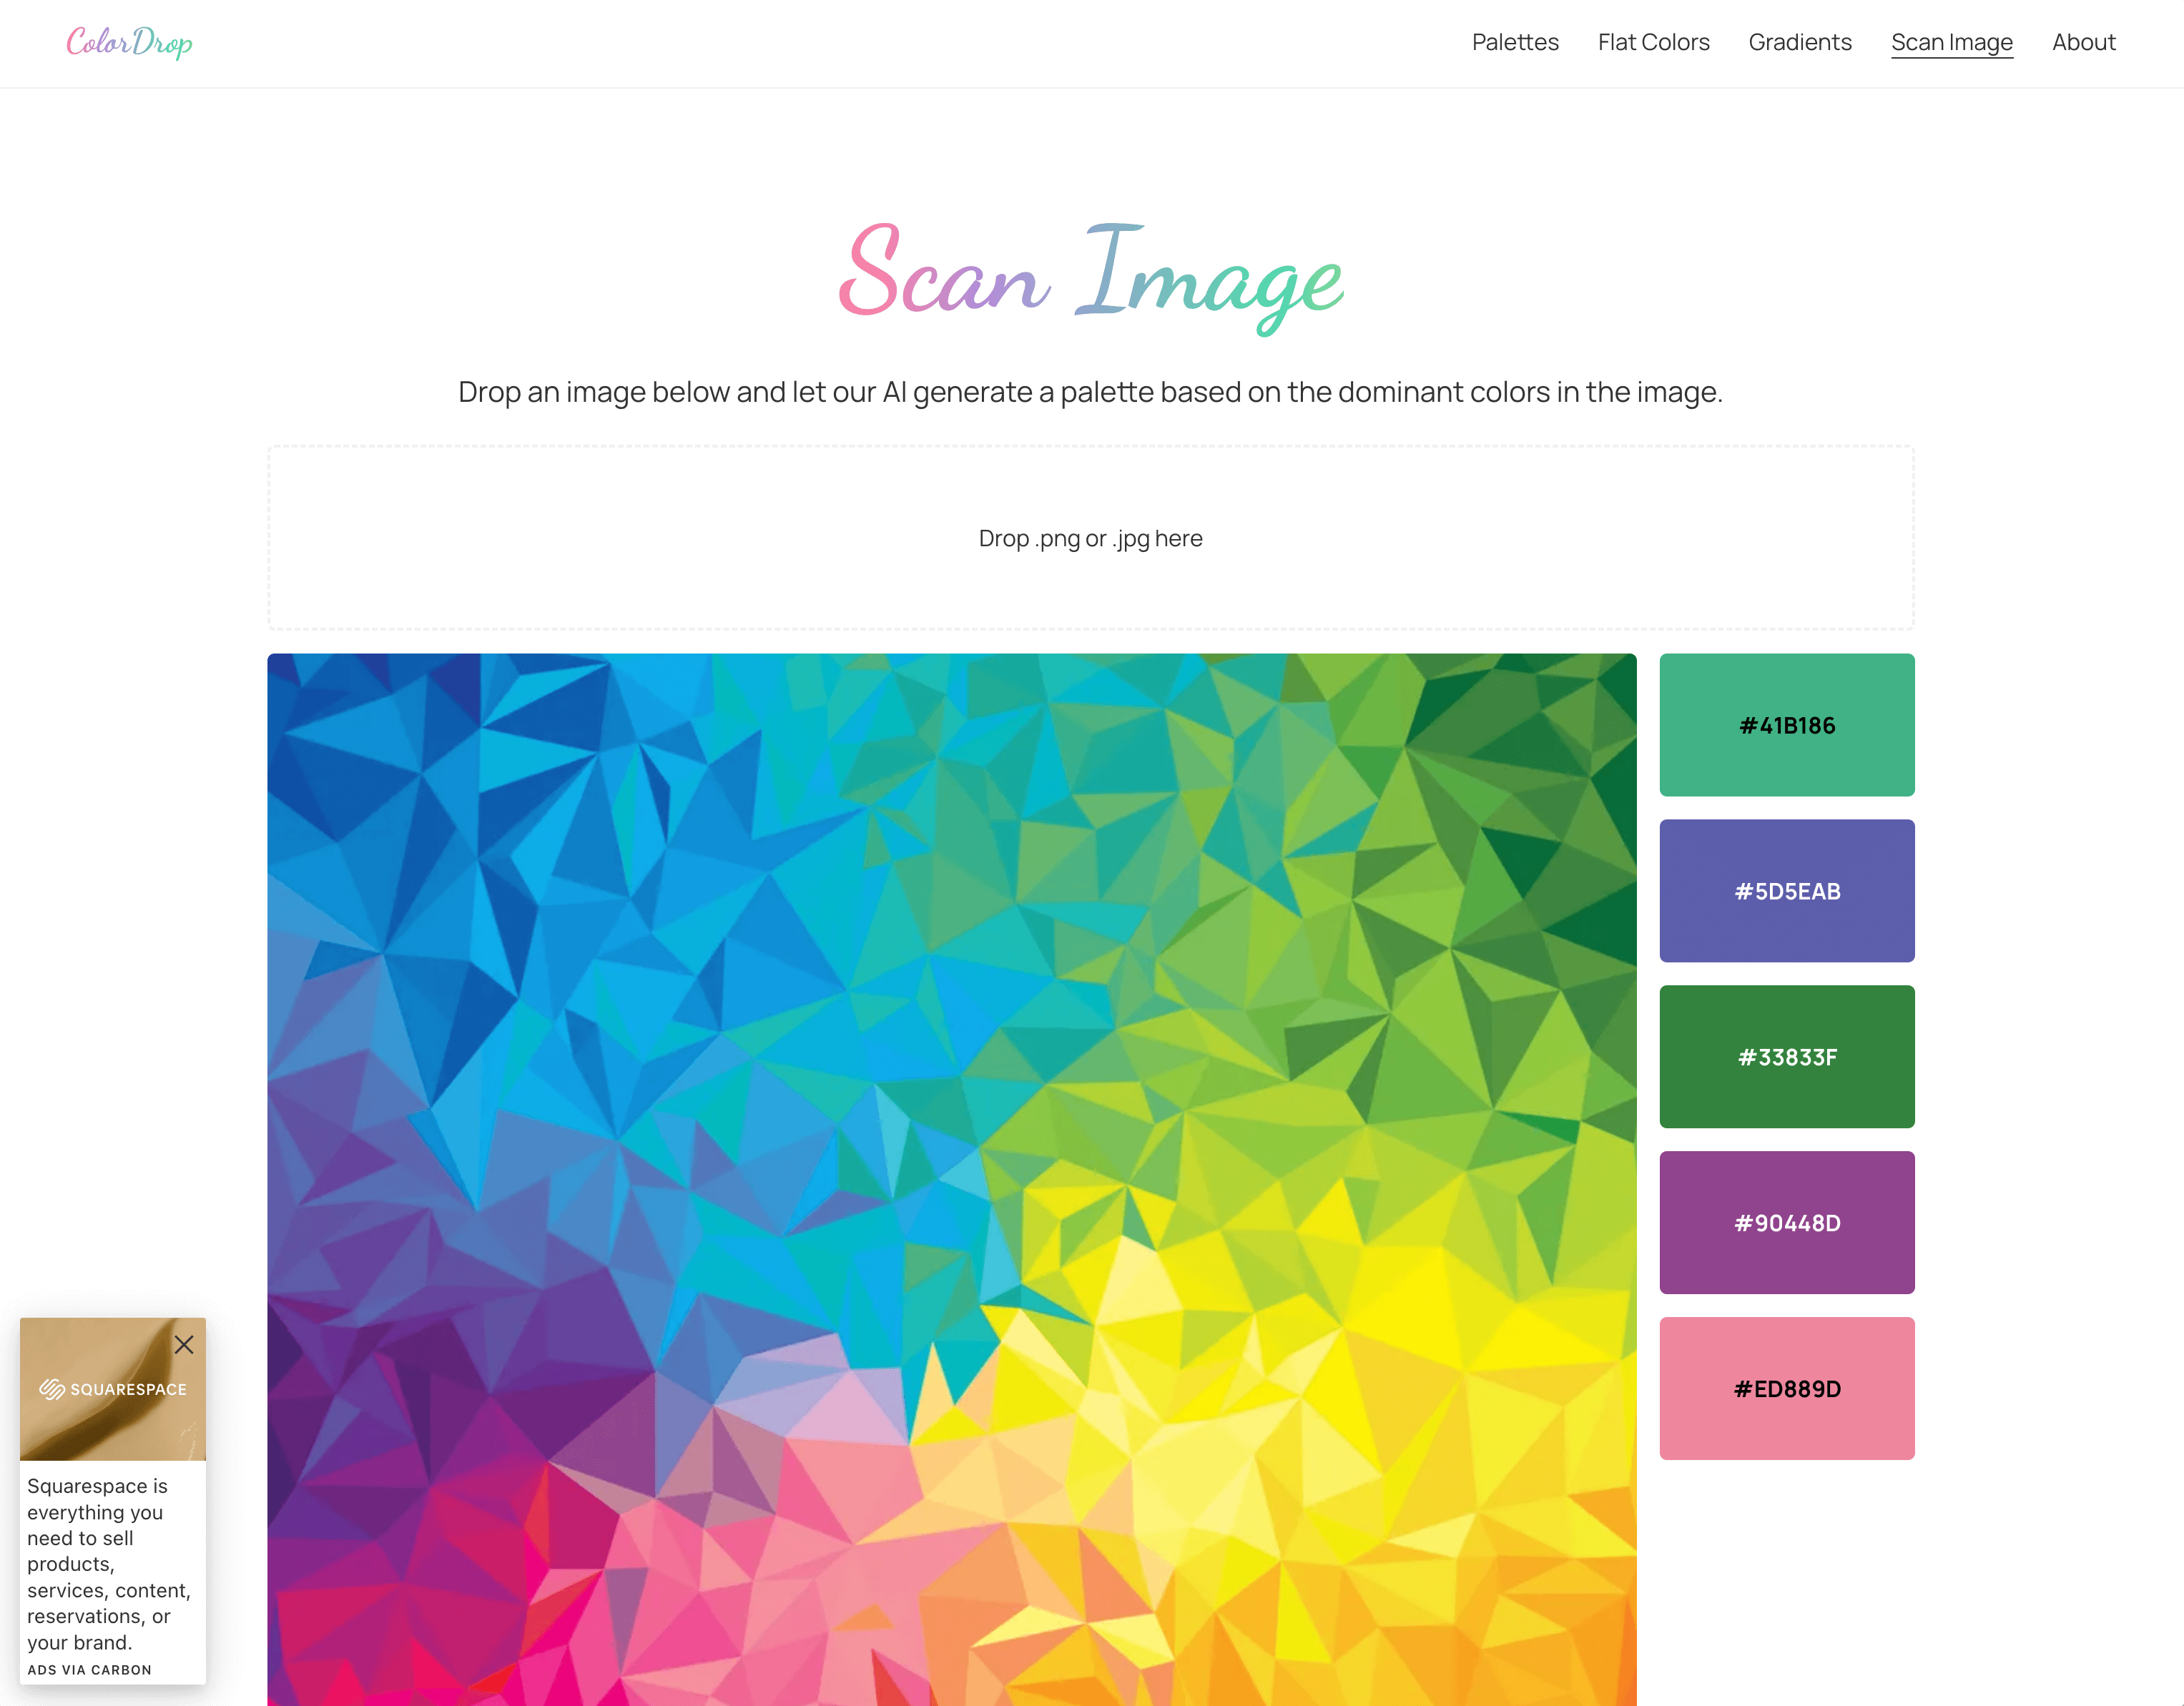 Image of the ColorDrop website